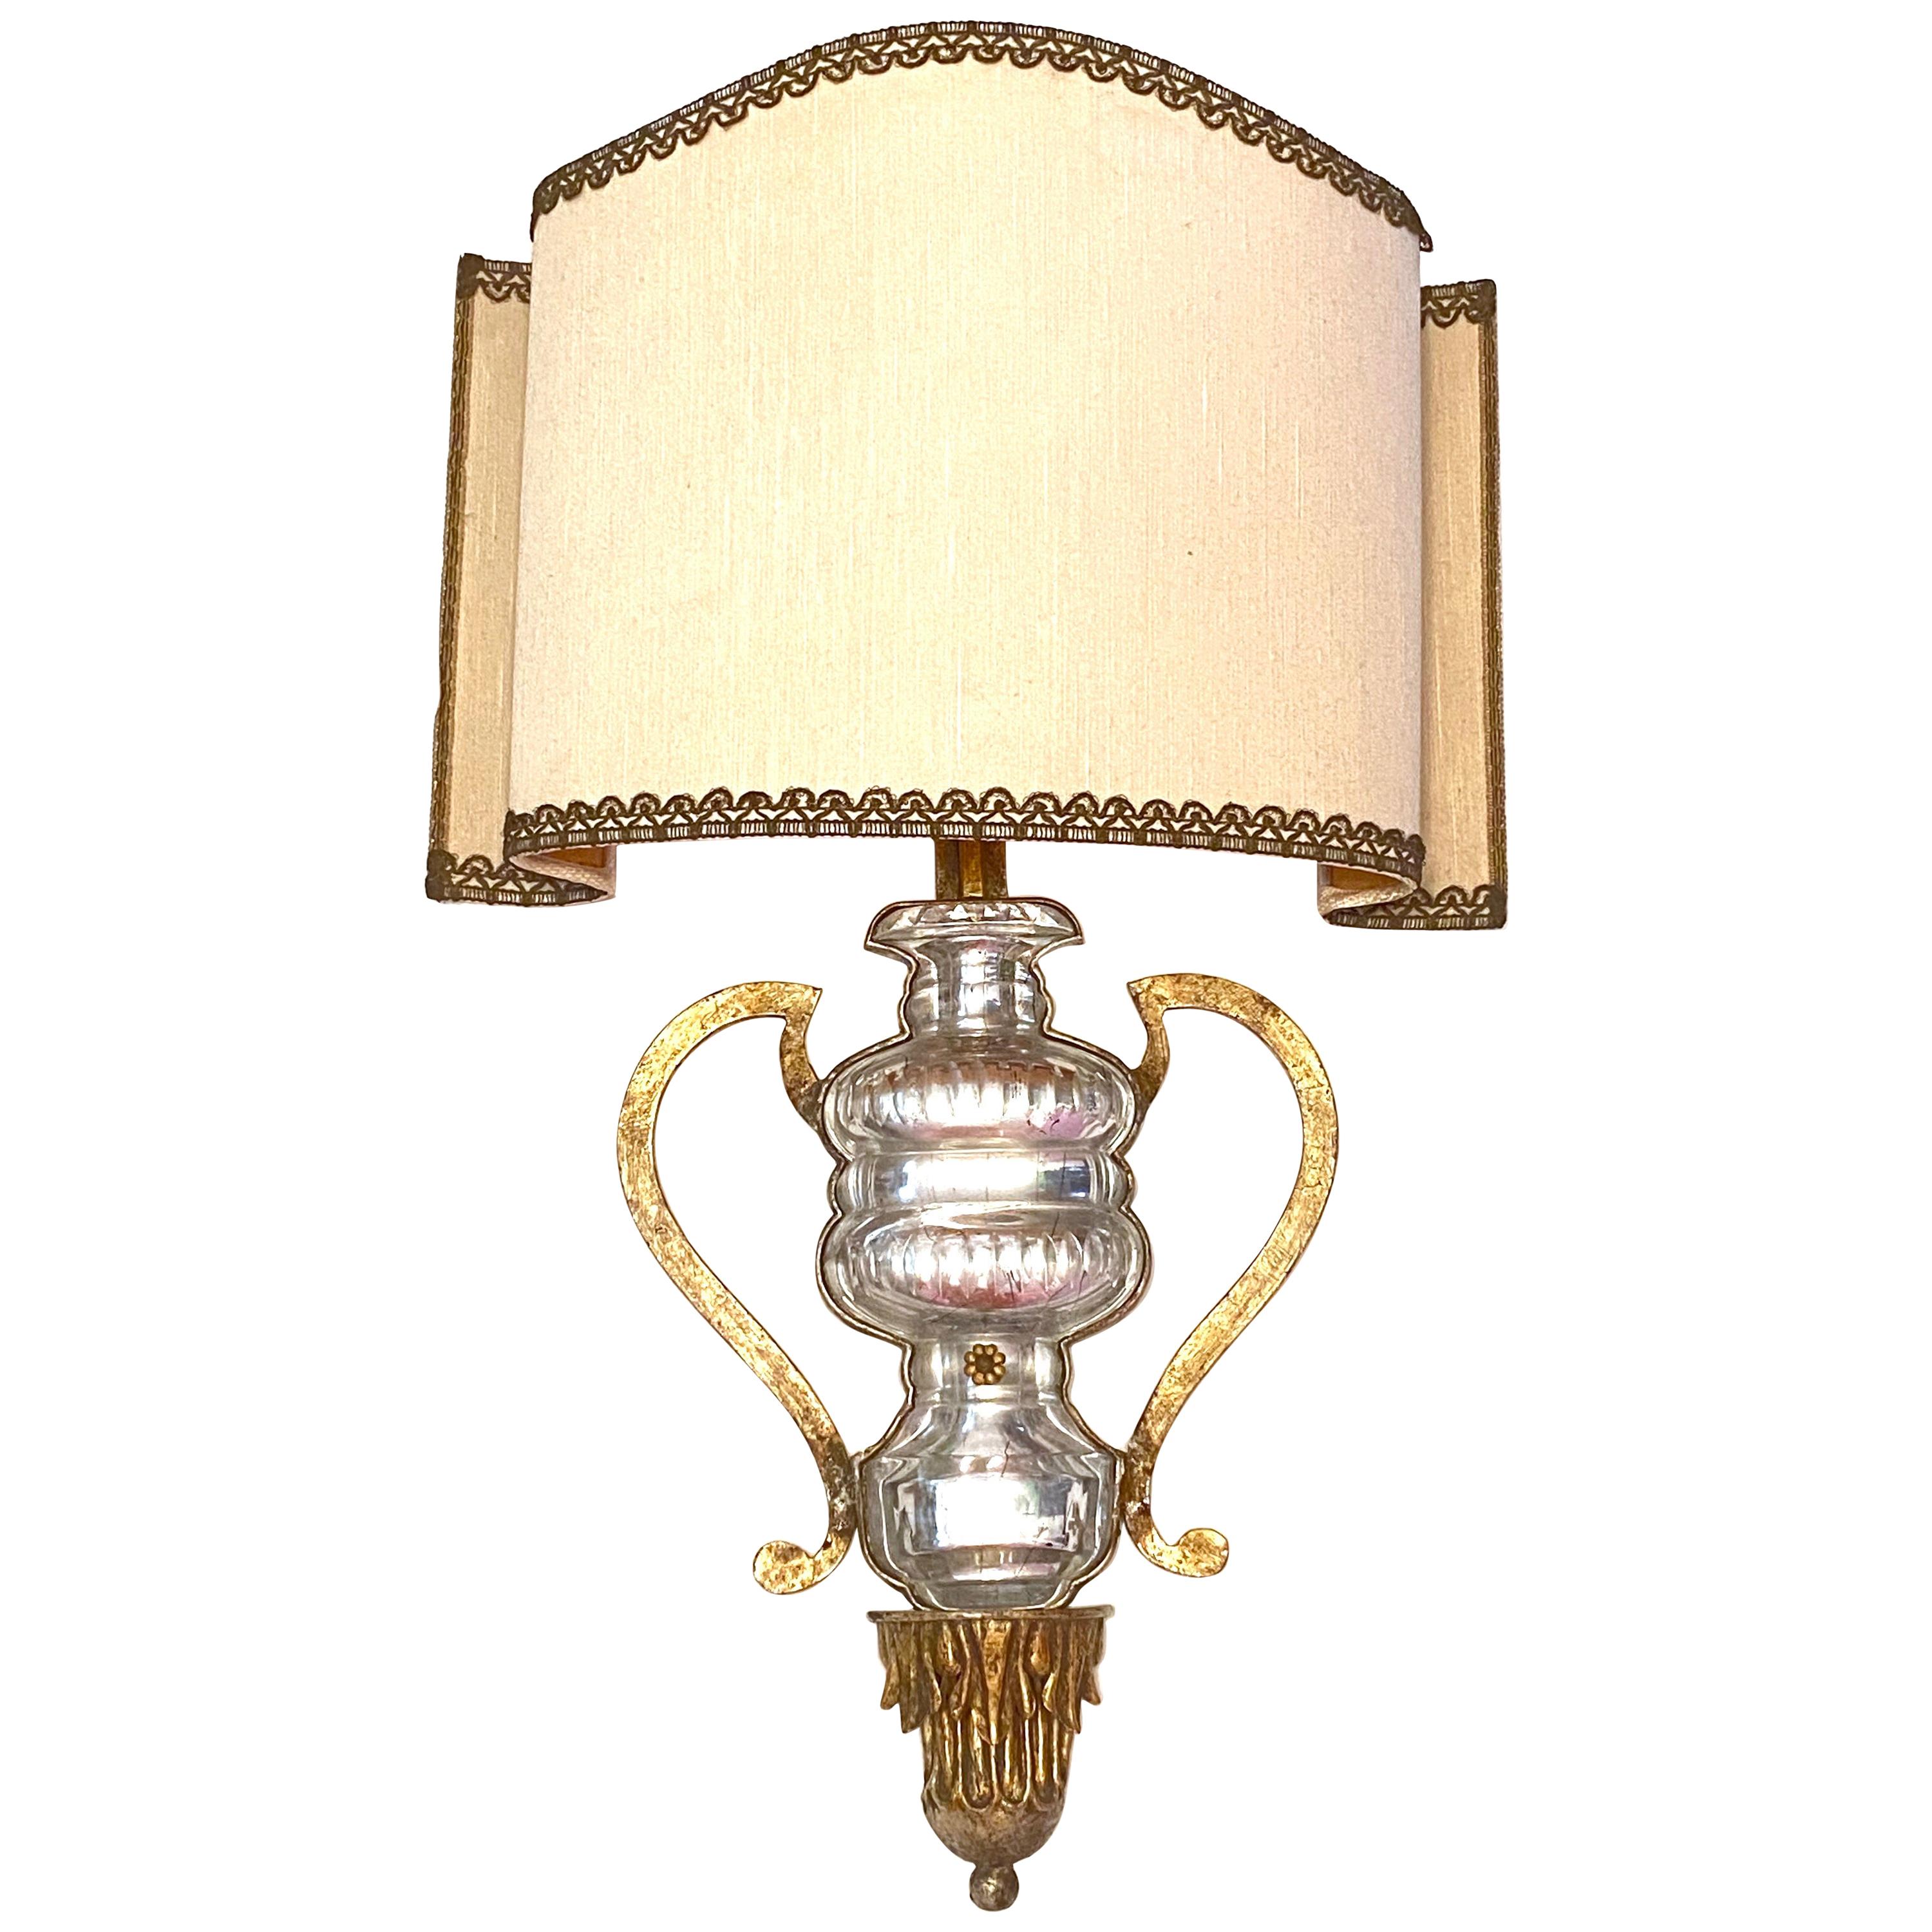 Gorgeous Monumental Italian Crystal Urn Motif Wall Sconce by Banci Florence For Sale